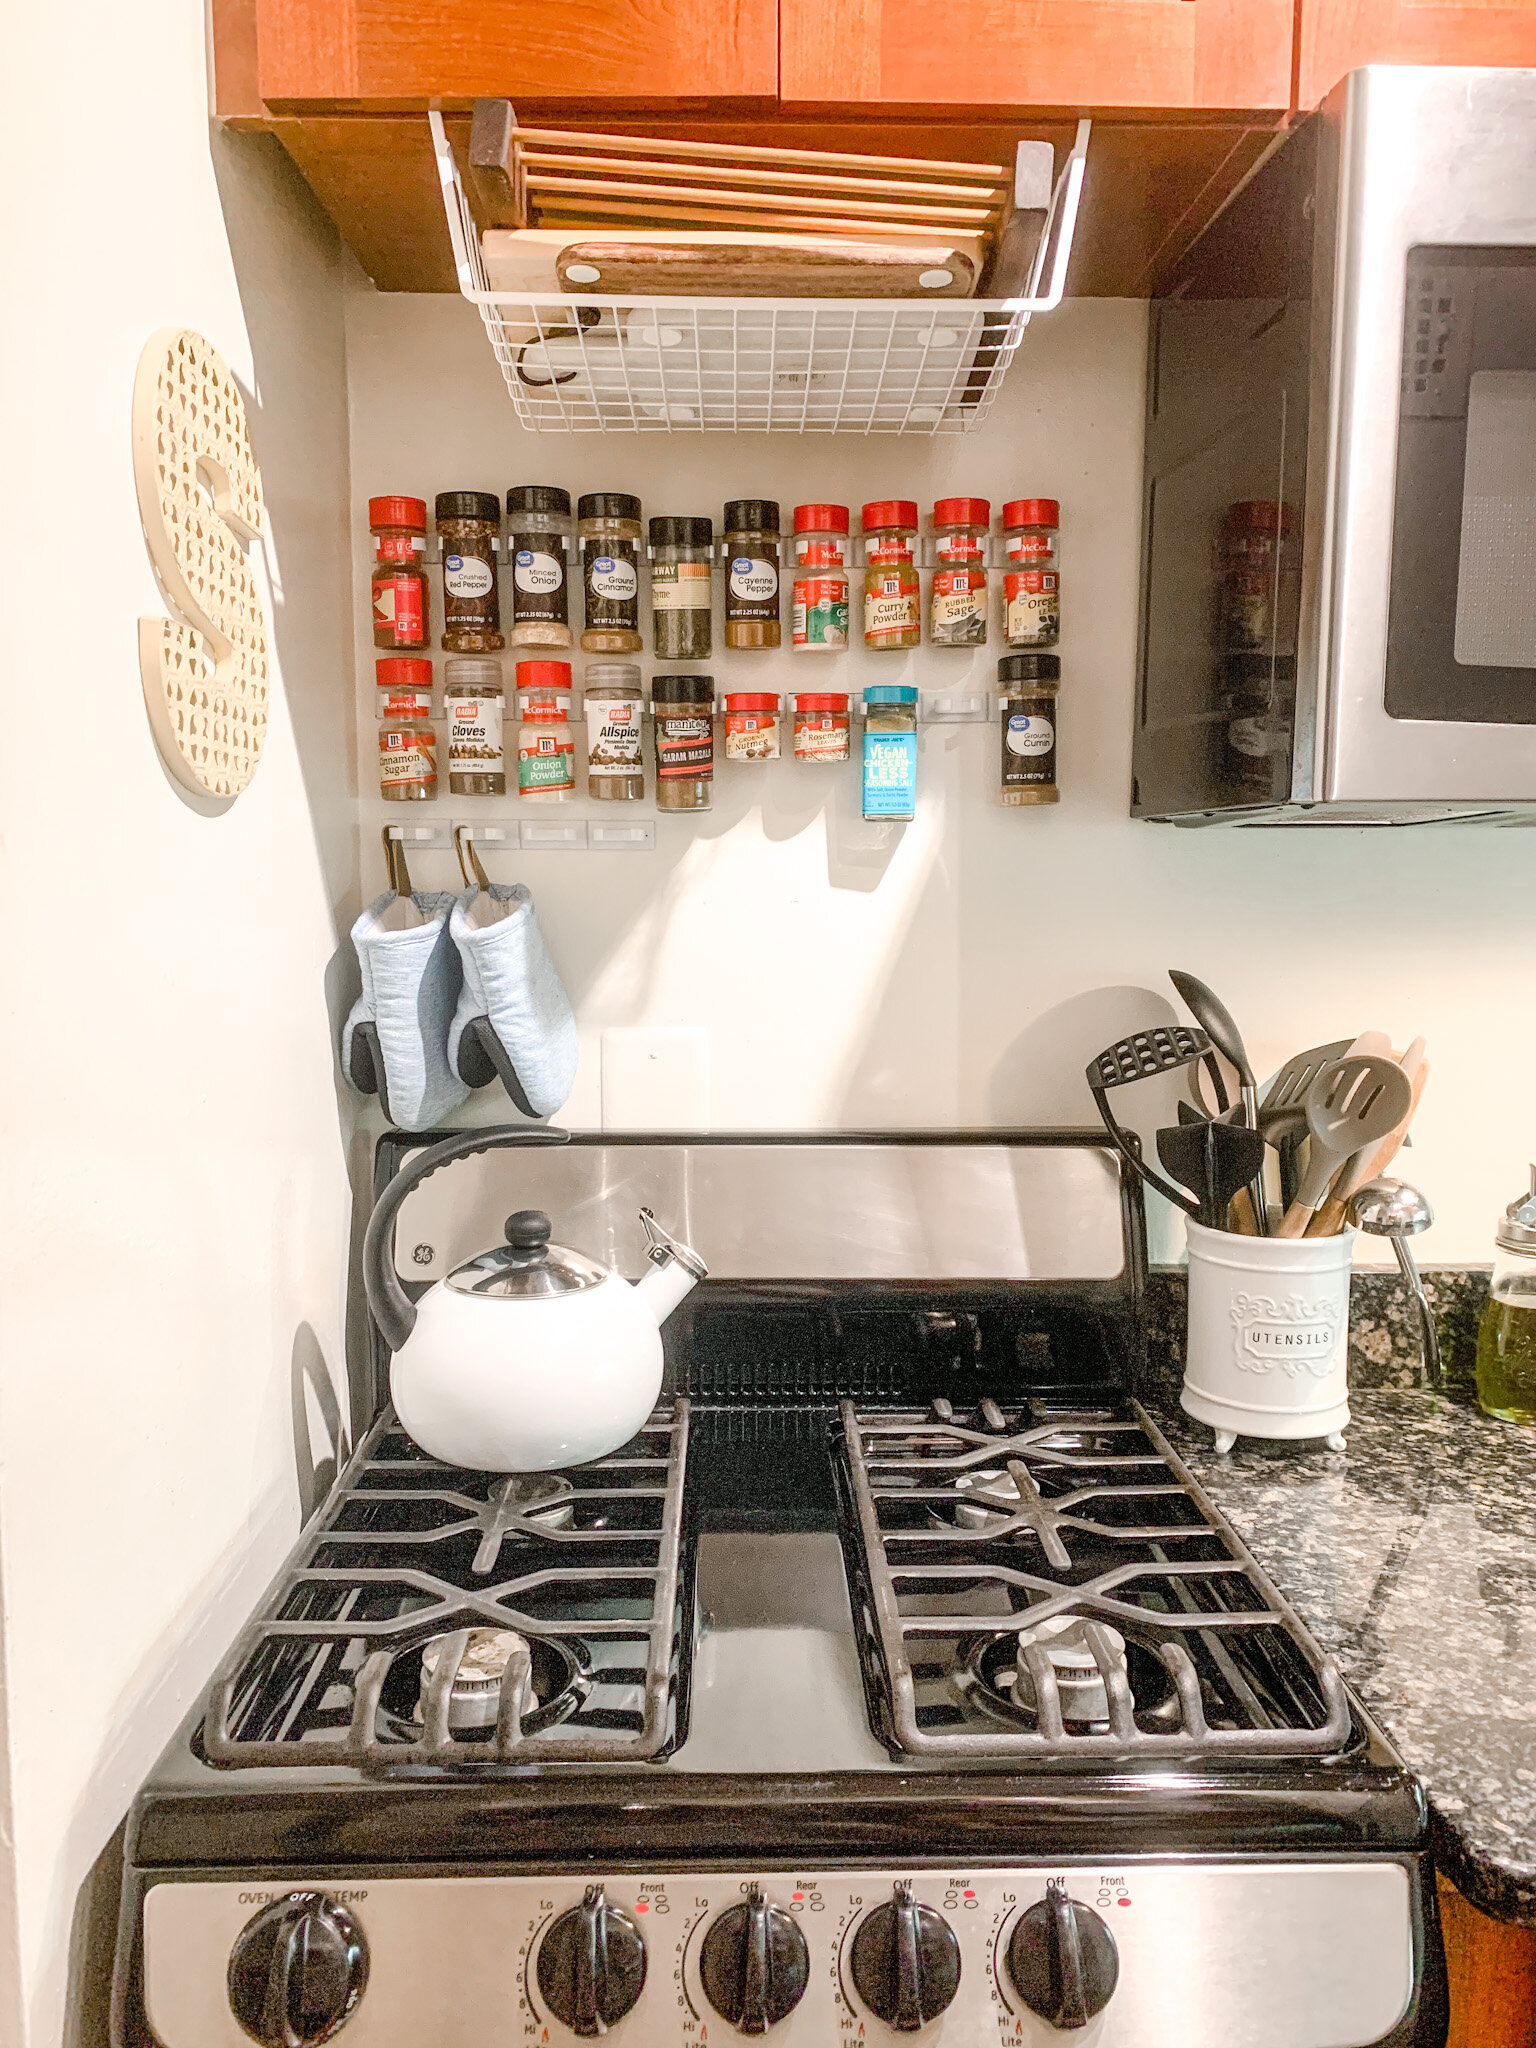 How to Organize an Apartment Kitchen with no Pantry - Organize with Me